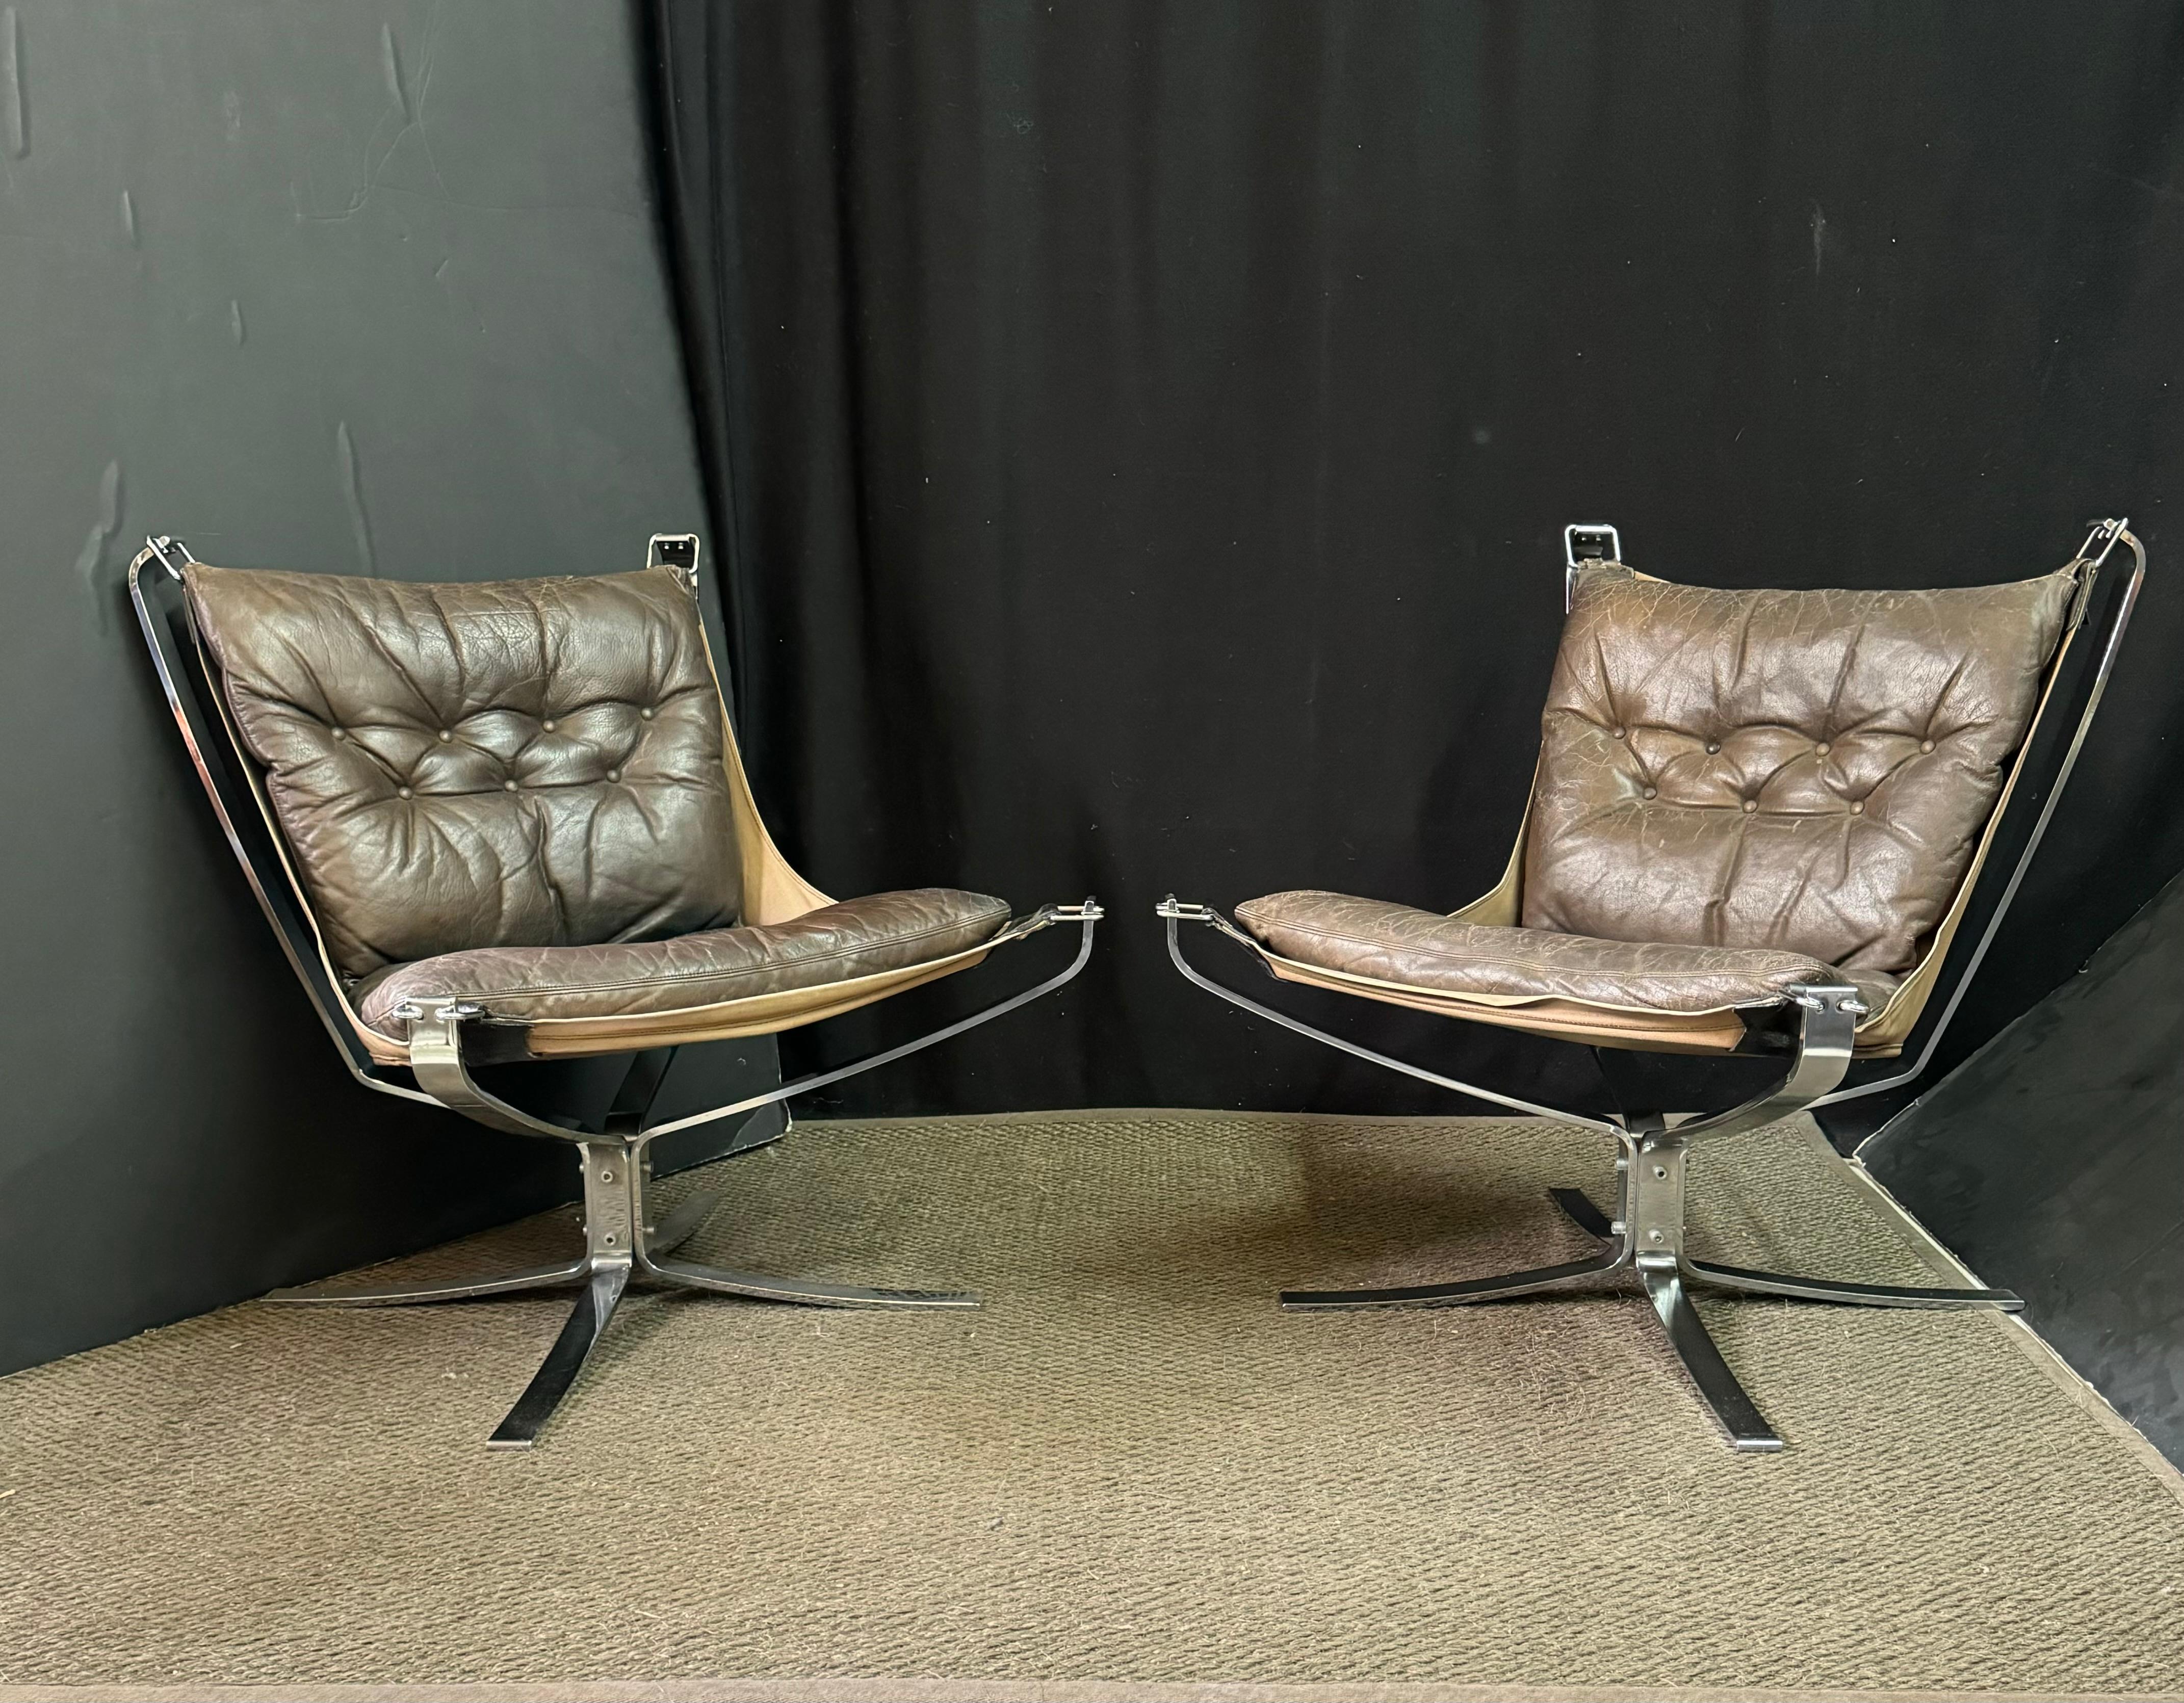 Pair of Mid-Century Falcon lounge chairs designed by Norwegian industrial and interior designer, Sigurd Ressell (1920-2010) in collaboration with iconic furniture manufacturer, Vatne Mobler. 

A rich legacy follows the Vatne Mobler brand whose